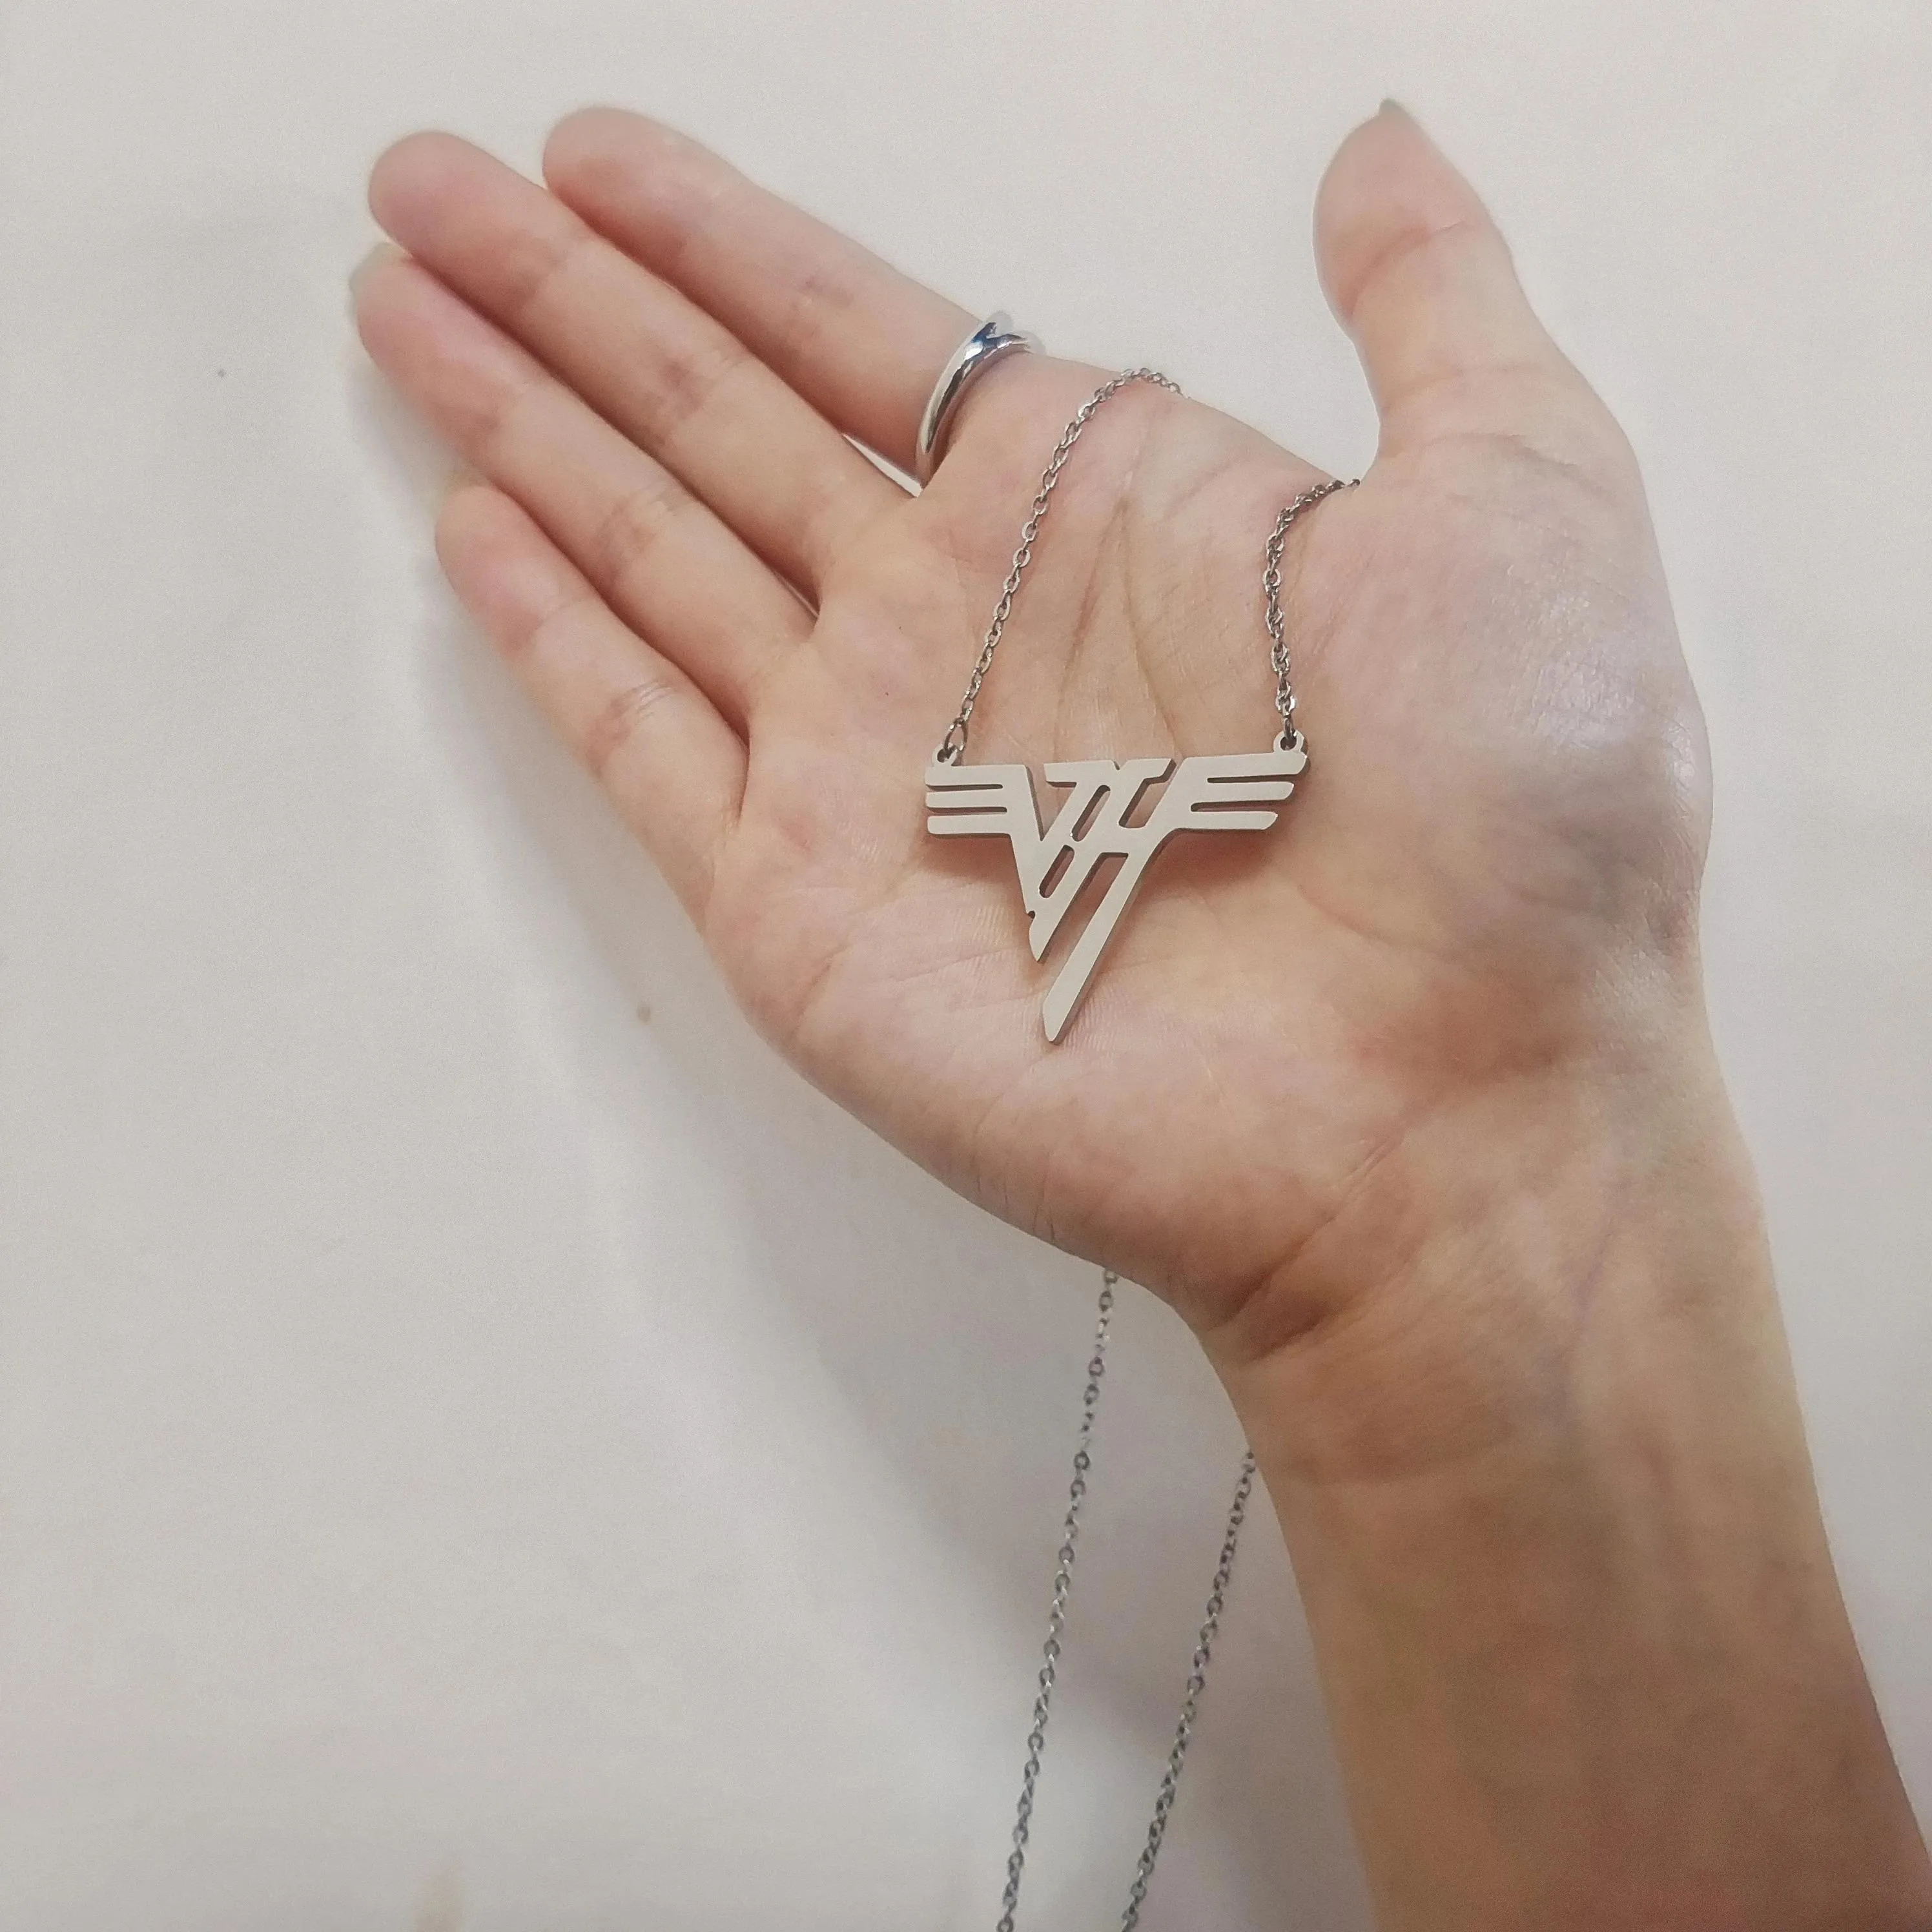 Van Halen Necklace - 3D model by DirtyFacedKid on Thangs